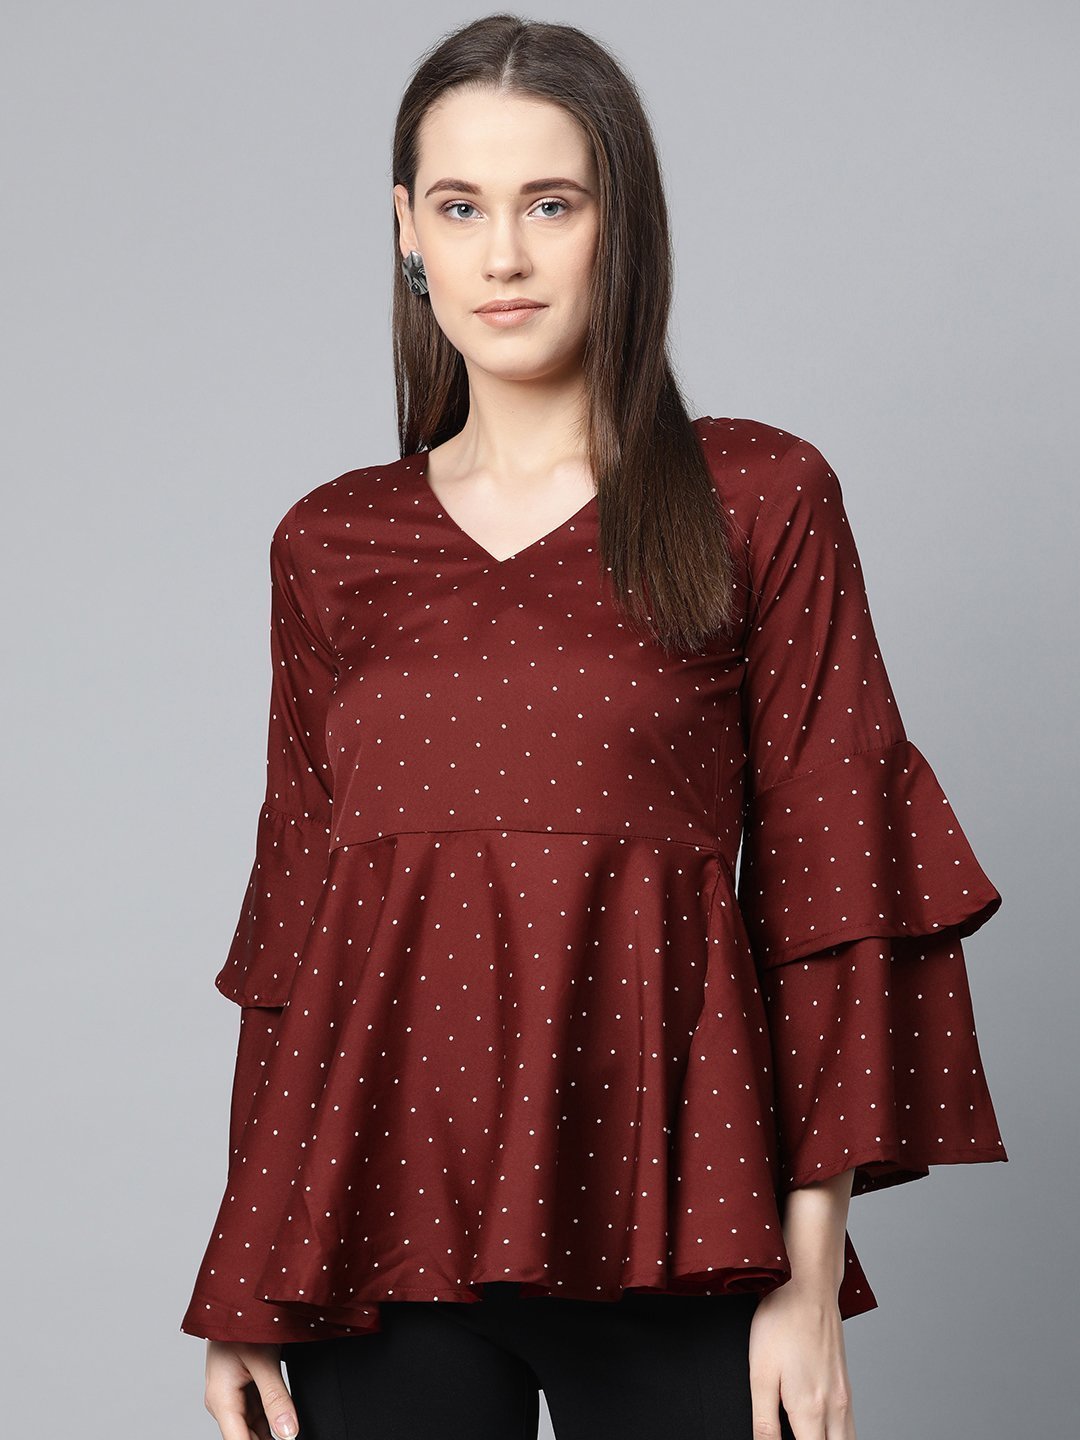 Women's Maroon & White Printed A Line Top - Jompers